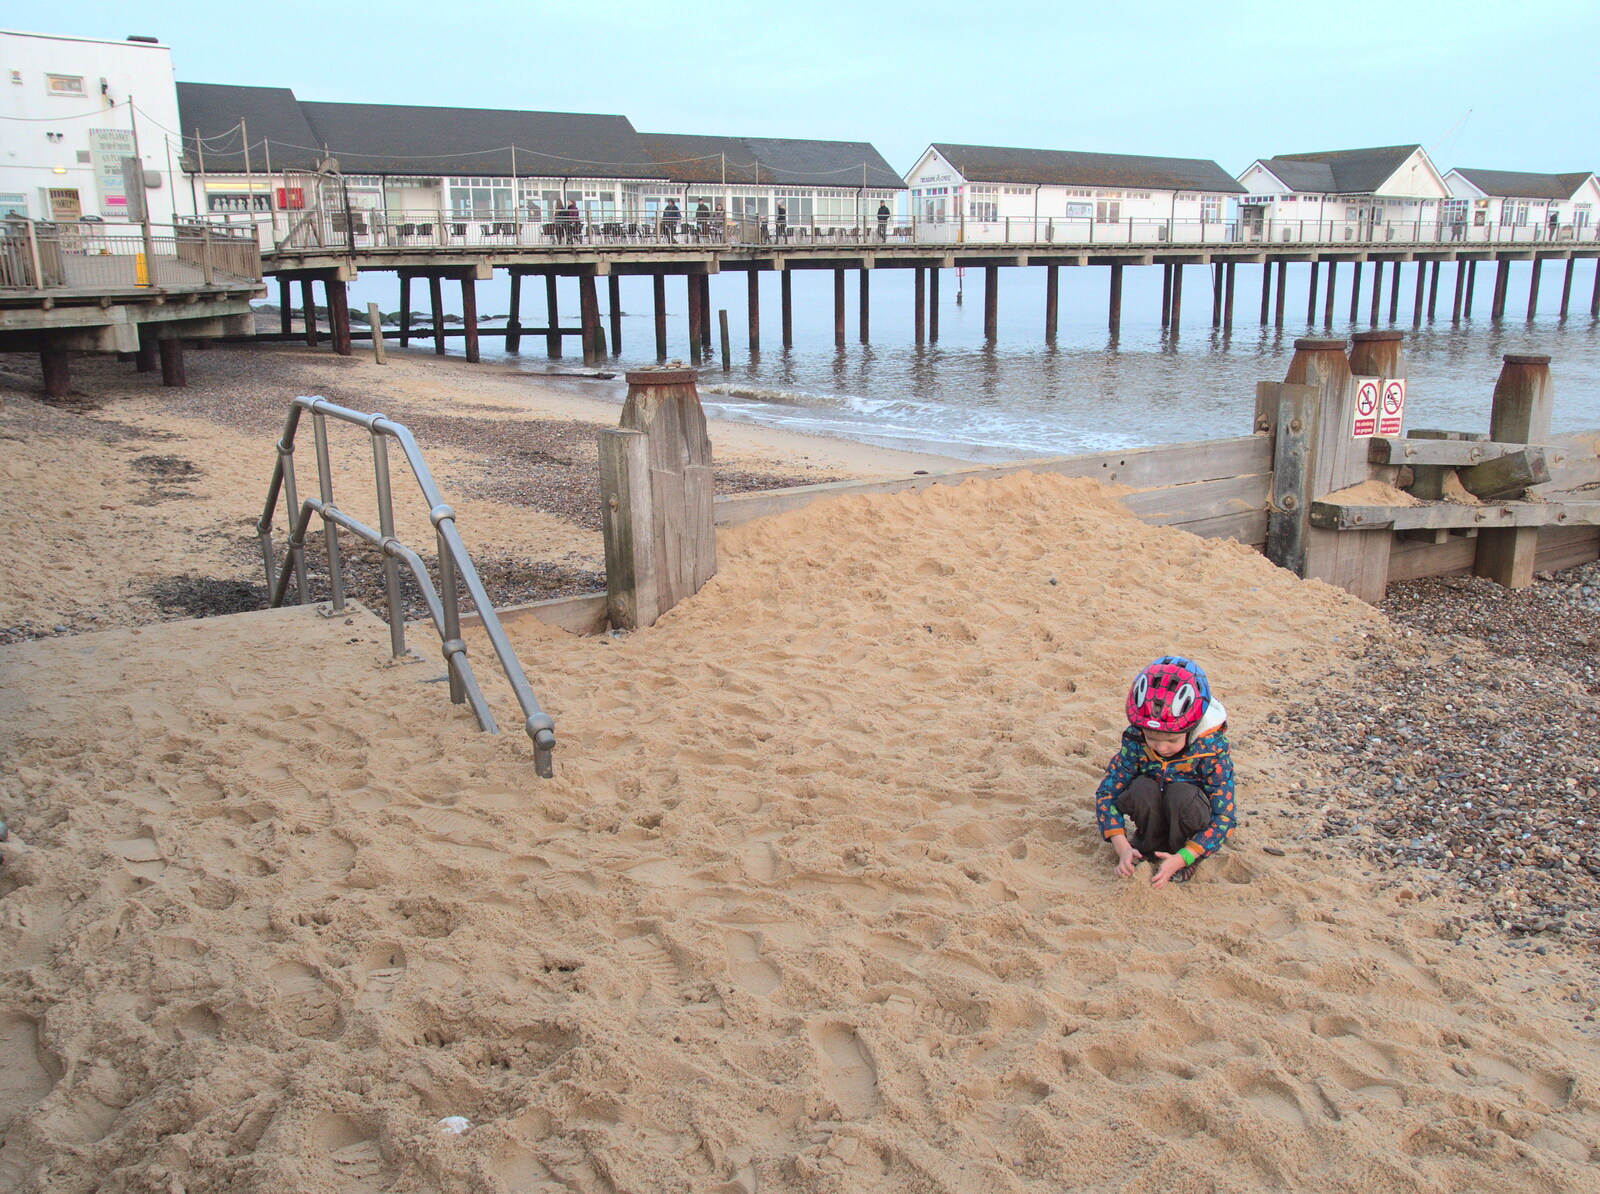 Harry pokes around in the sand from Southwold Seaside Pier, Southwold, Suffolk - 18th December 2016